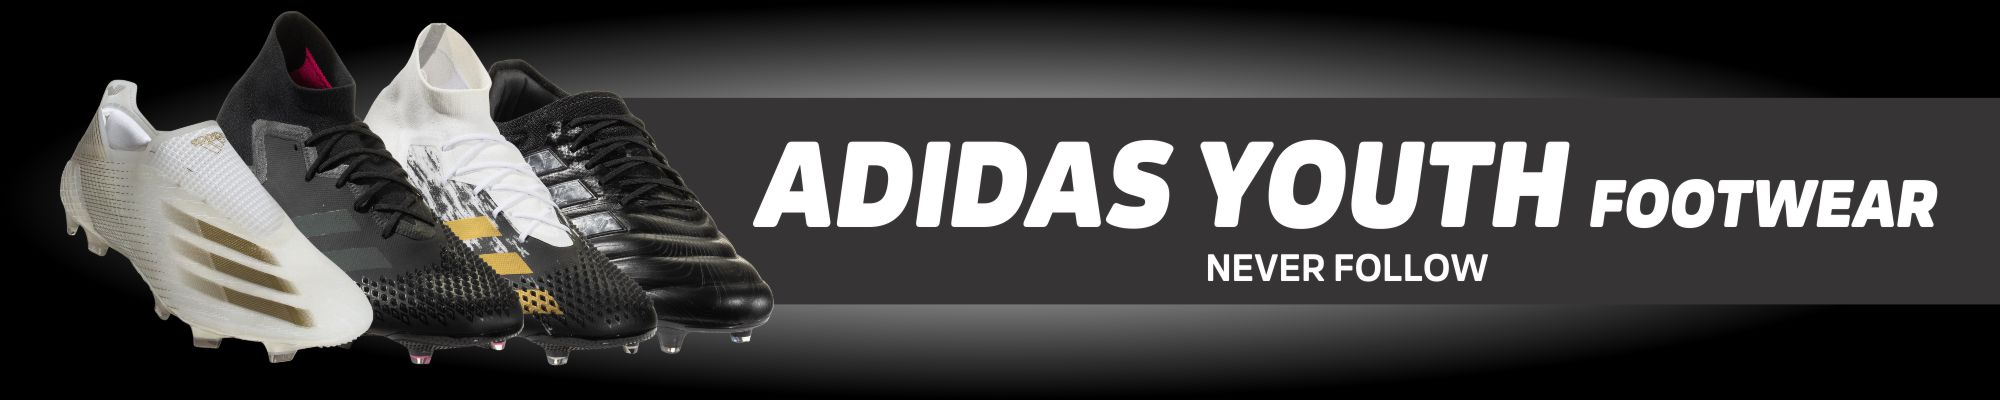 Adidas Youth Footwear - By Price: Lowest to Highest